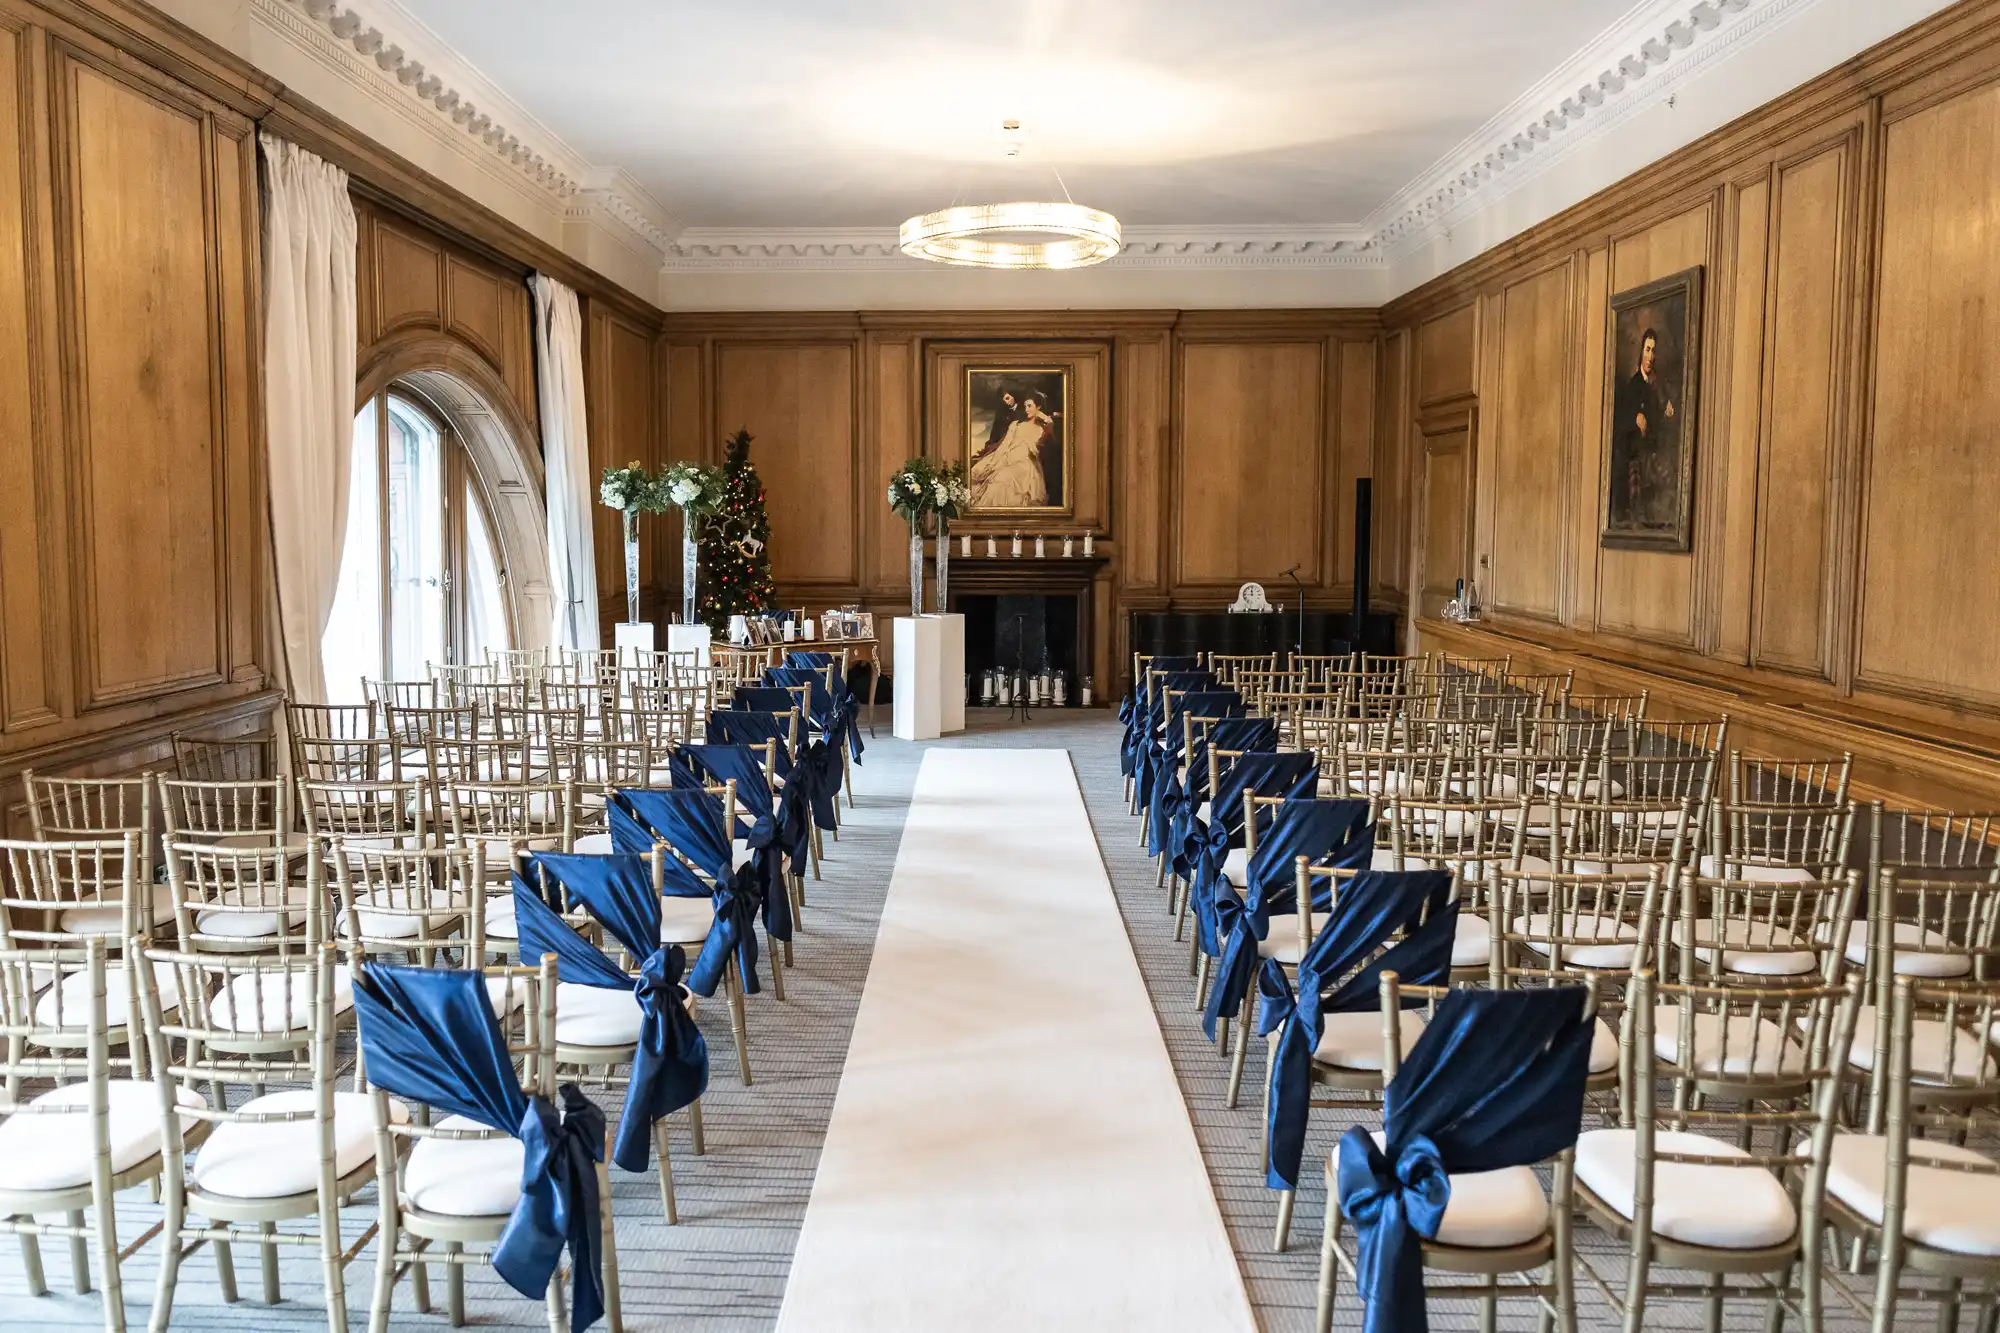 A neatly arranged wedding ceremony setup in an elegantly wooden-paneled room. Rows of gold chairs, some with blue bows, line a white aisle runner leading to an altar with flower arrangements.